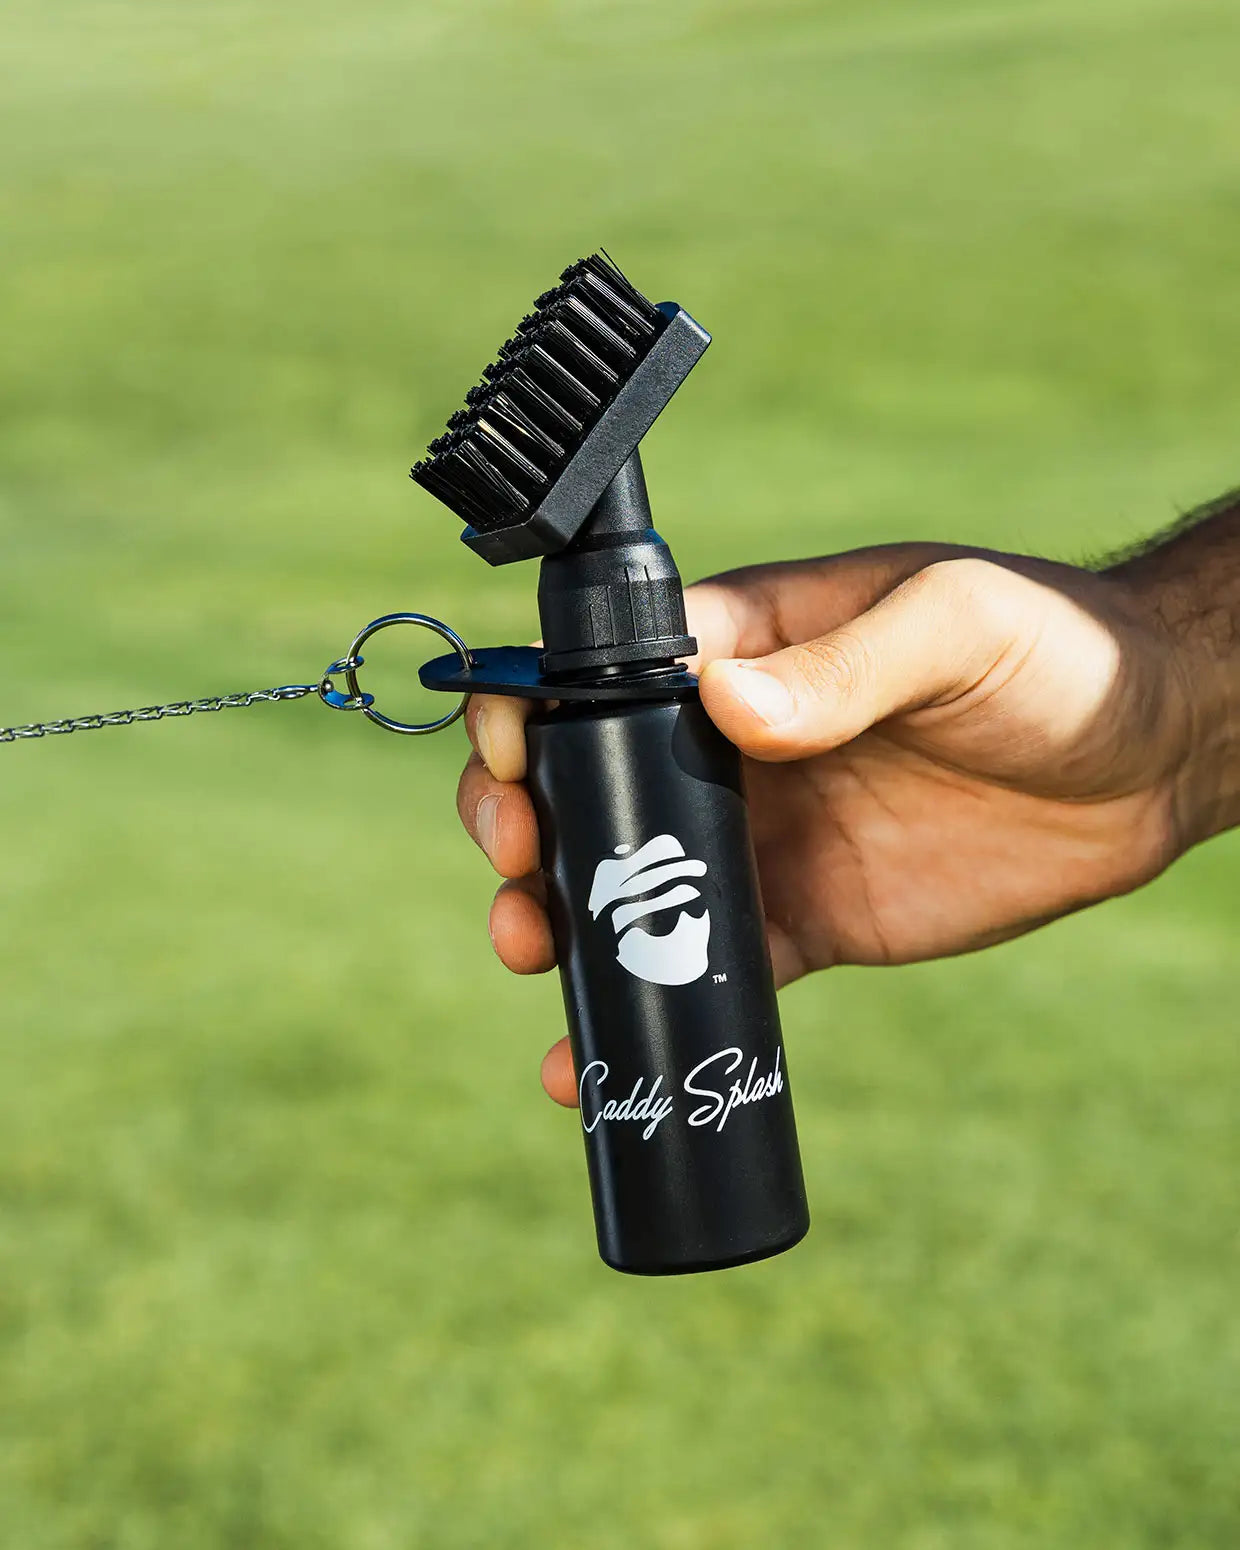 Caddy Splash Golf Cleaning Brush extended retractable clip